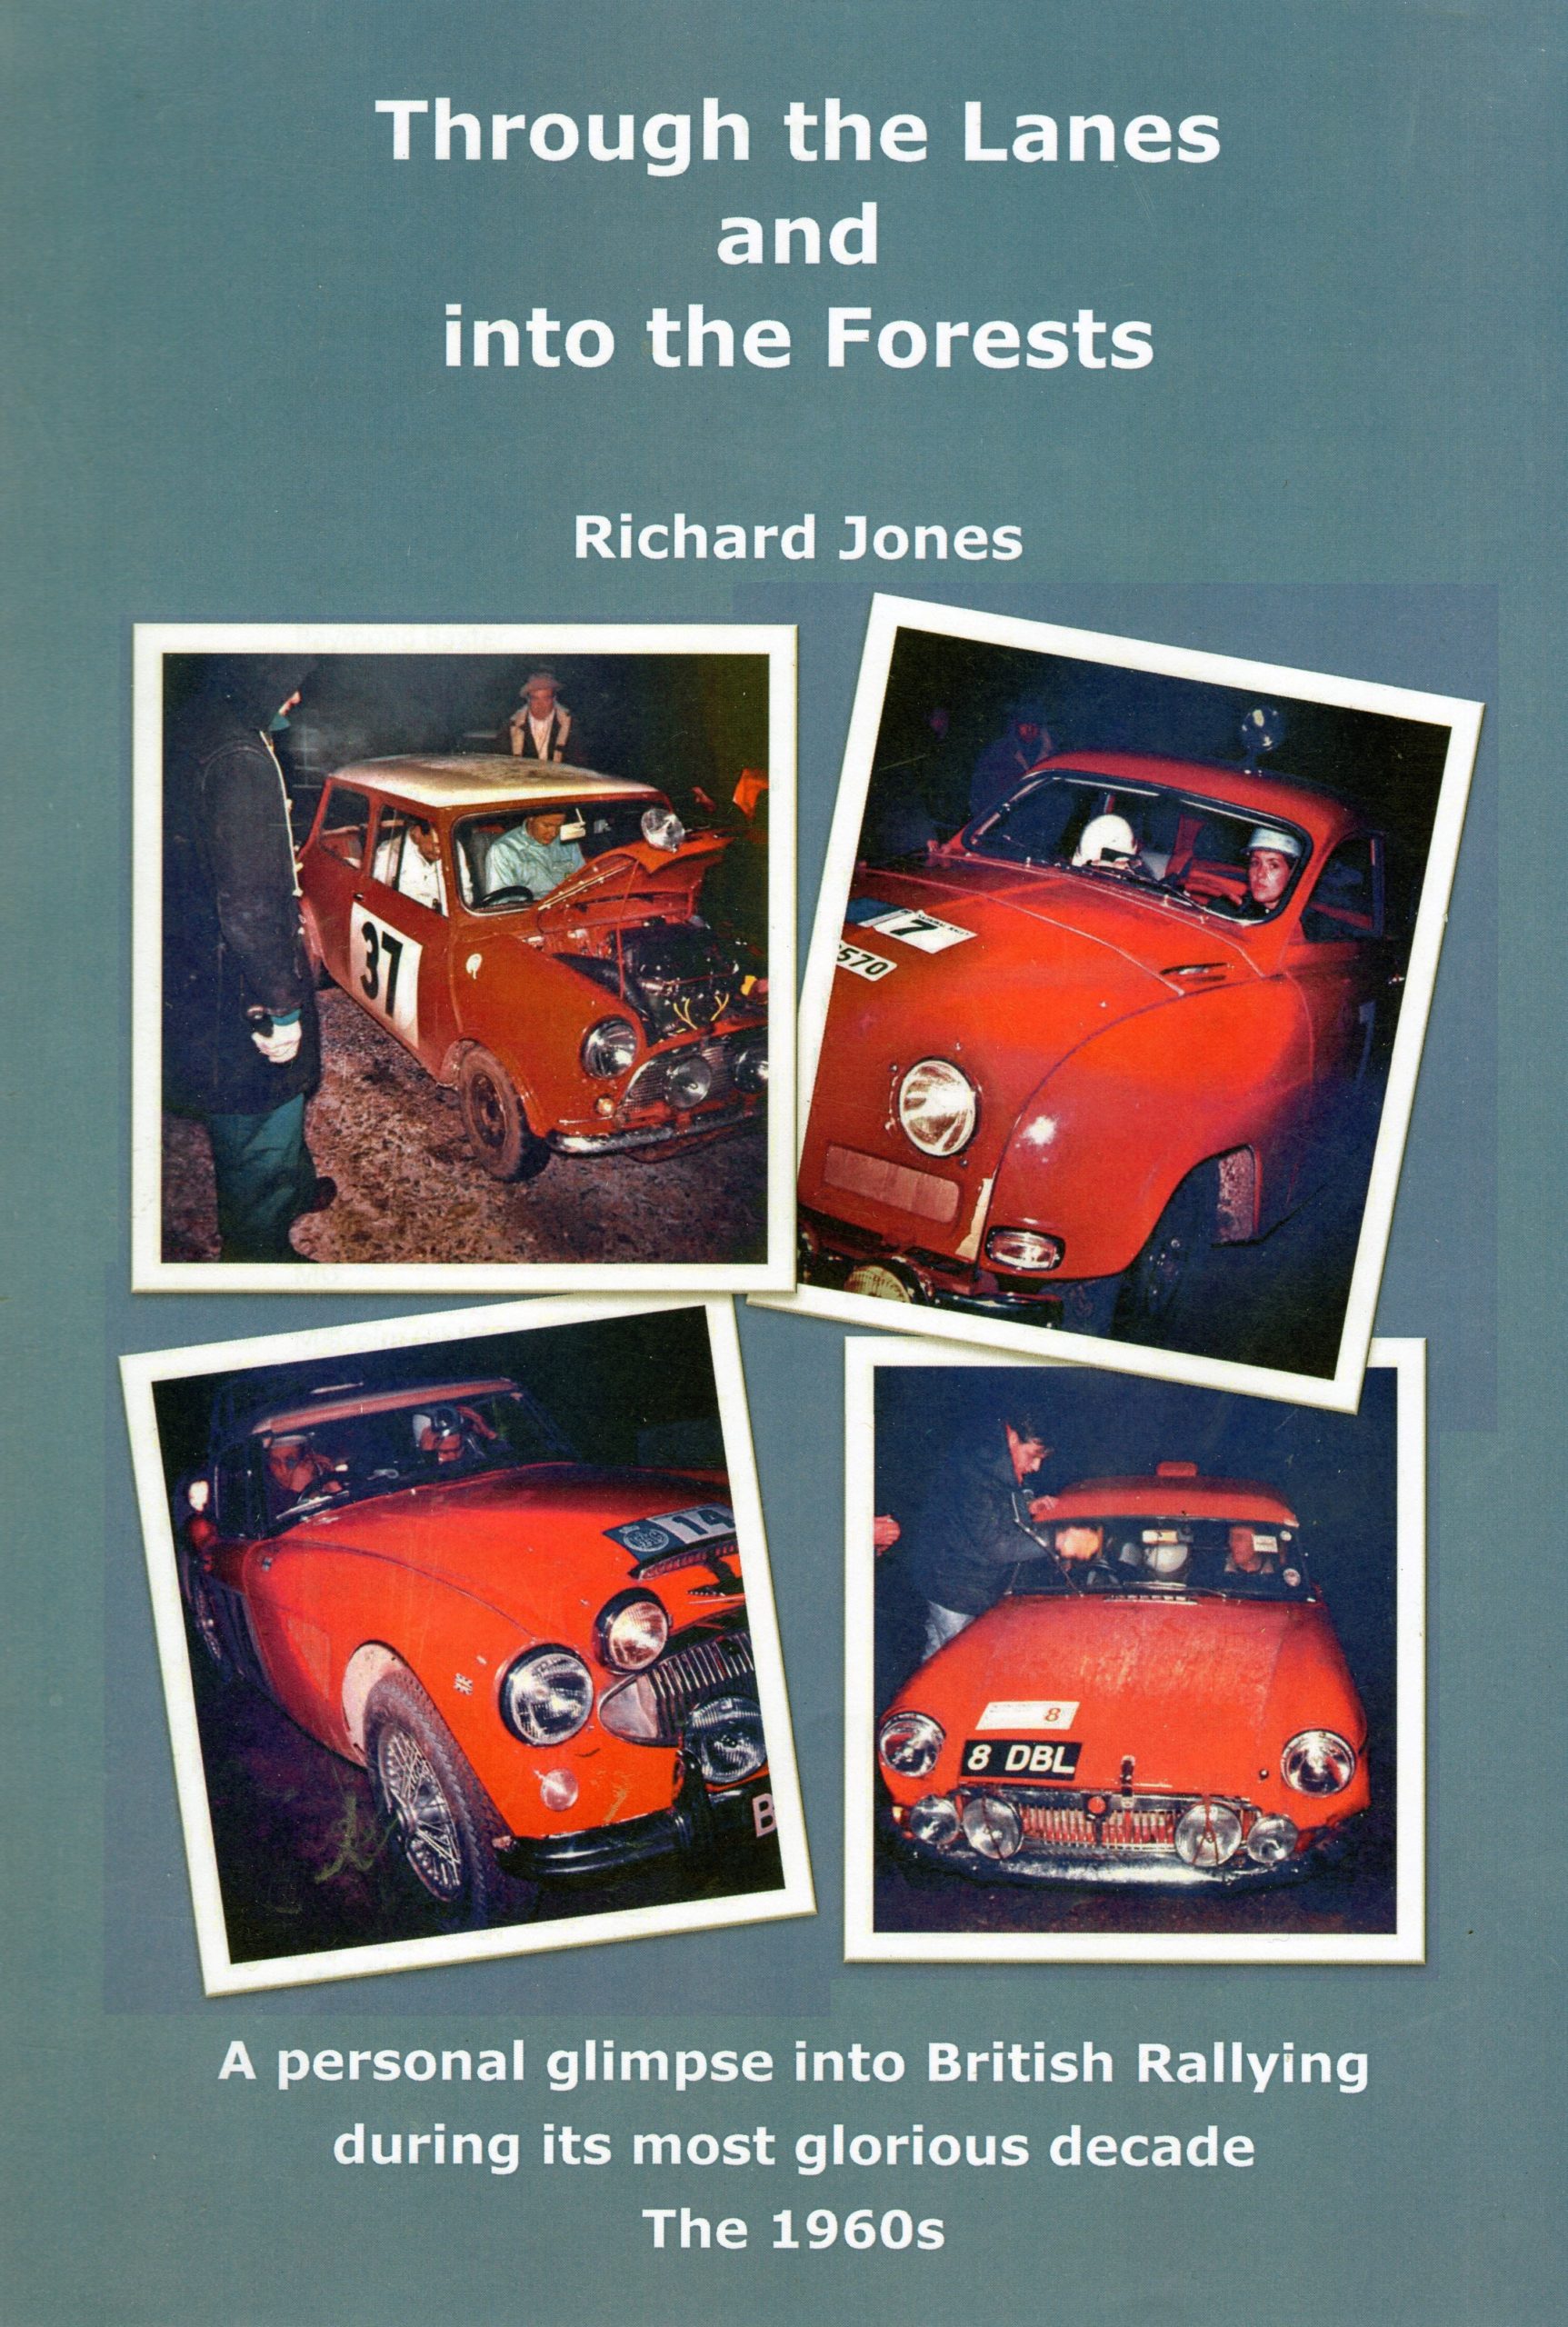 Rare colour photos of 1960s rally driving captured in new book by Richard Jones